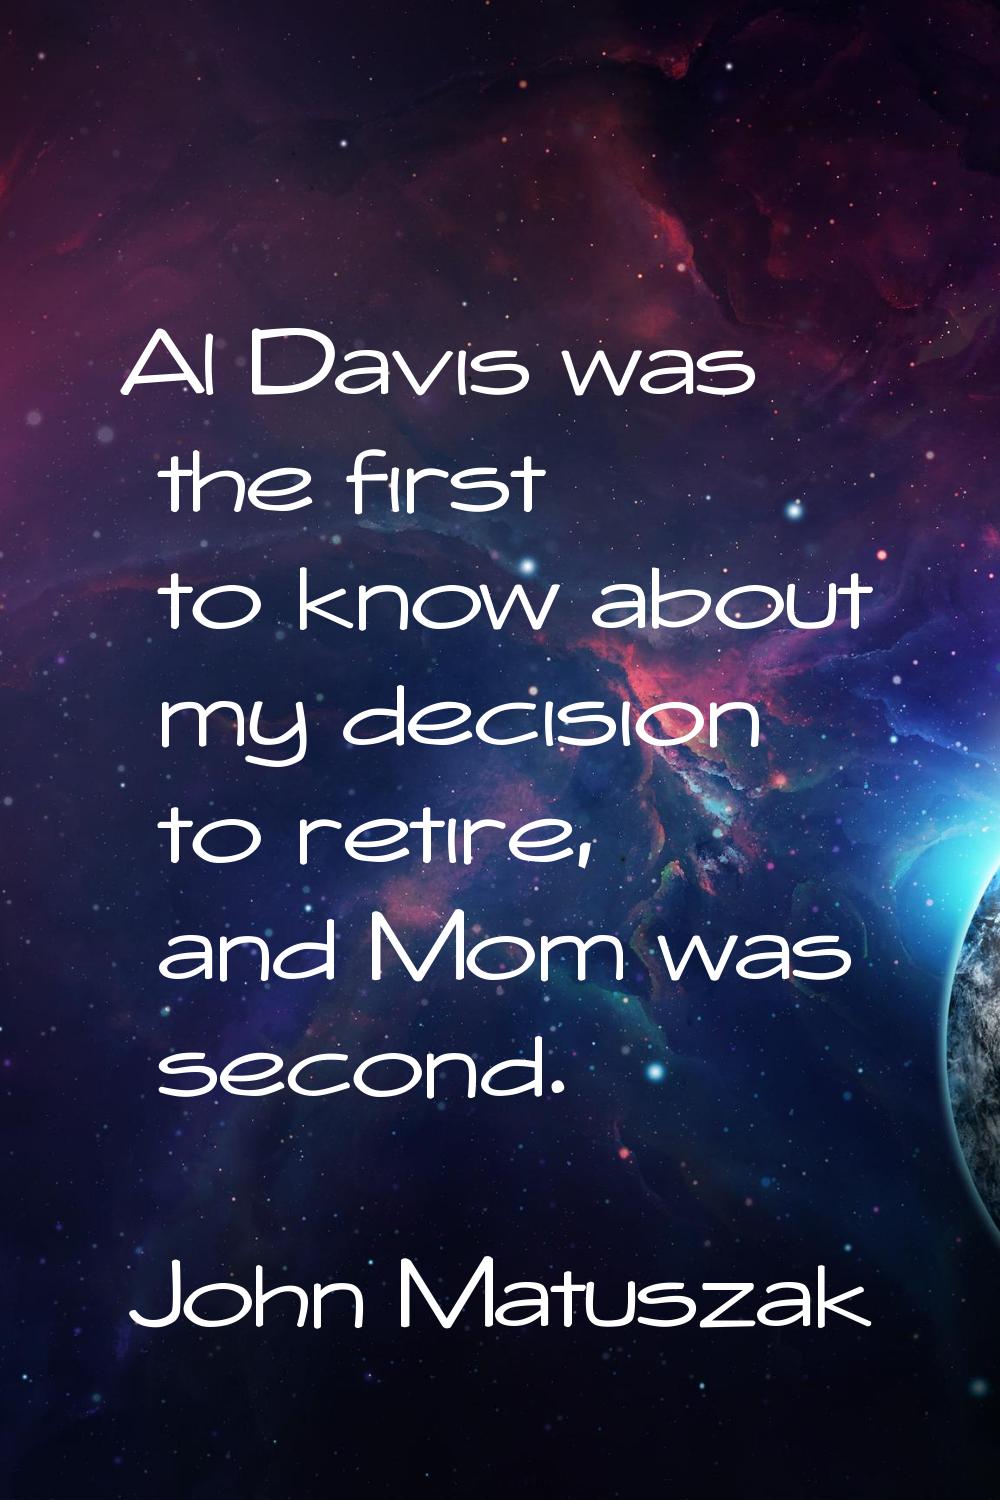 Al Davis was the first to know about my decision to retire, and Mom was second.